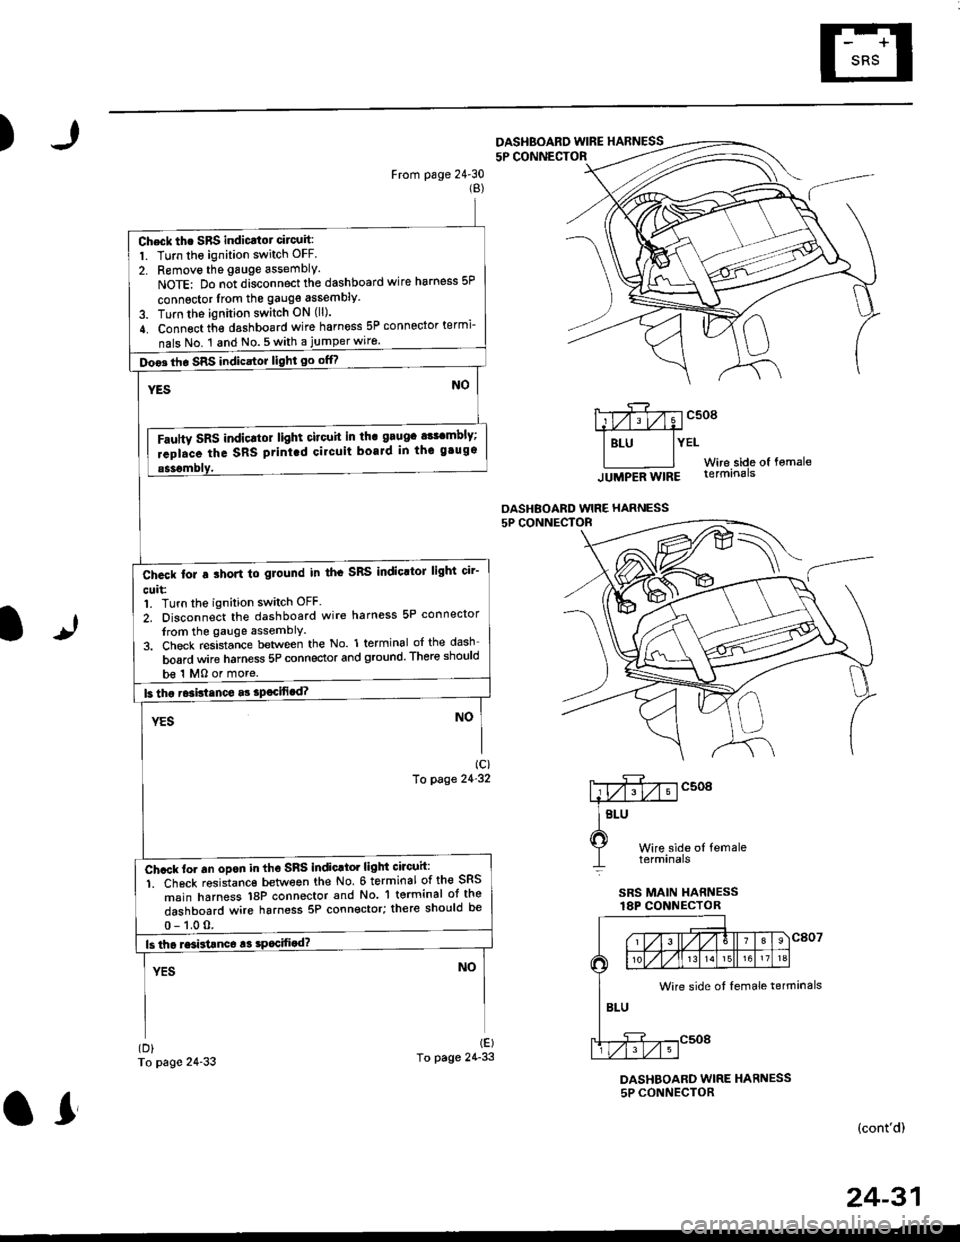 HONDA CIVIC 1998 6.G Owners Guide )
From page 2430(B)
To page 24-33
5P CONNECTOF
mcsogA#
I Btu lYEtWire side of fomale
lUUpeA Wtng terminals
OASHBOARD WIRE HARNESS
It
Wire side ol femaletetmtnals
SRS MAIN HARNESSlAP CONNECTOR
(D)
To 